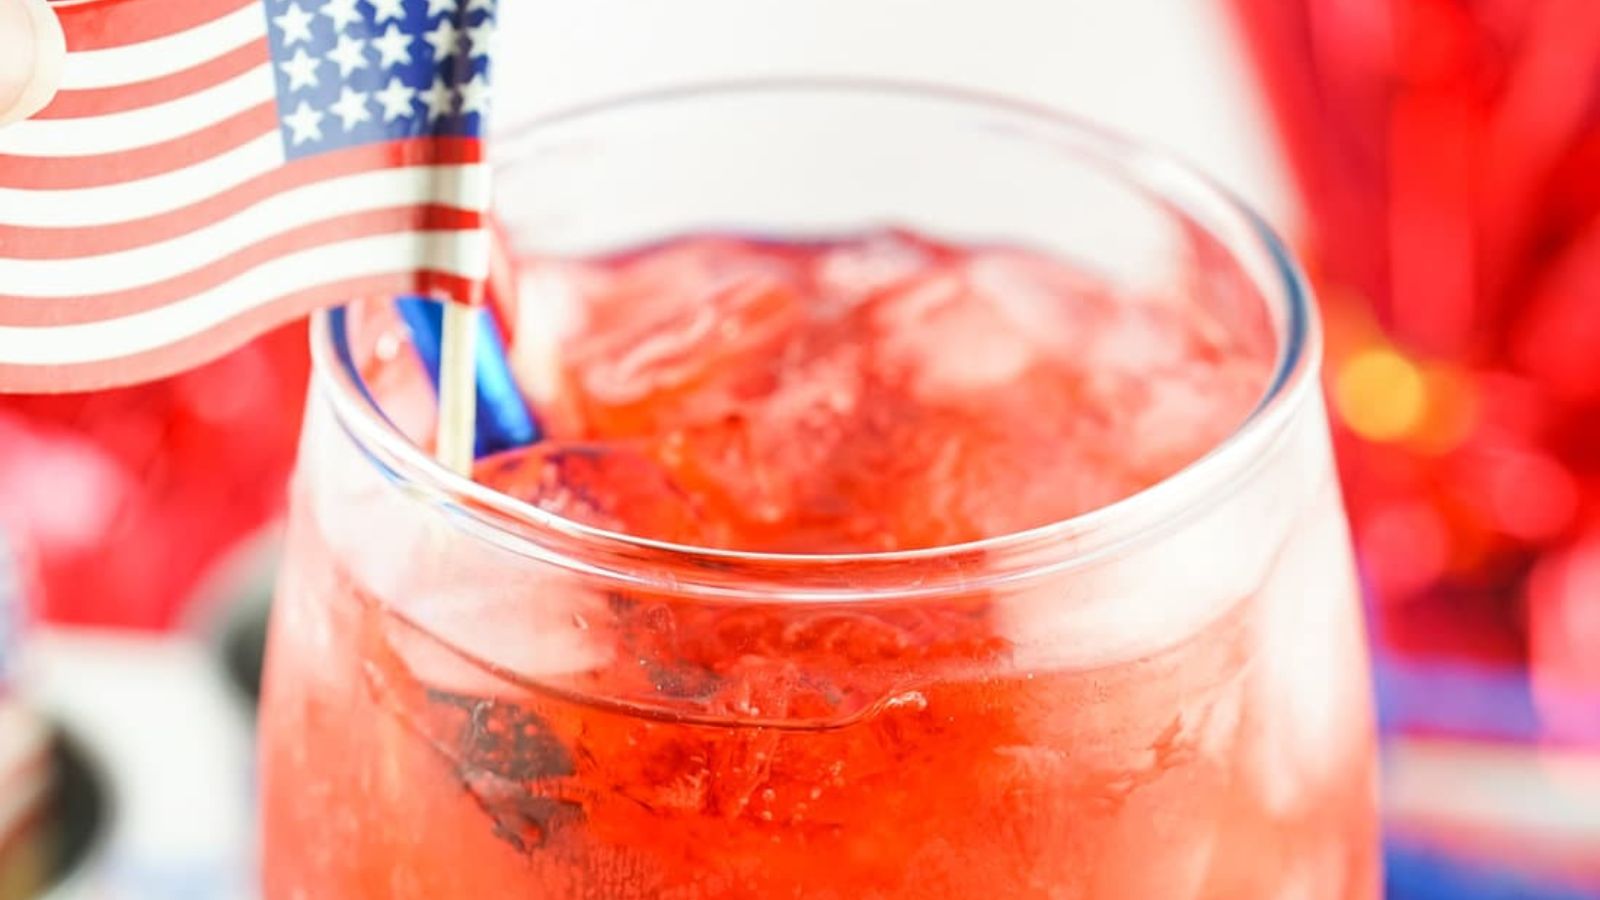 RED WHITE AND BLUE COCKTAIL